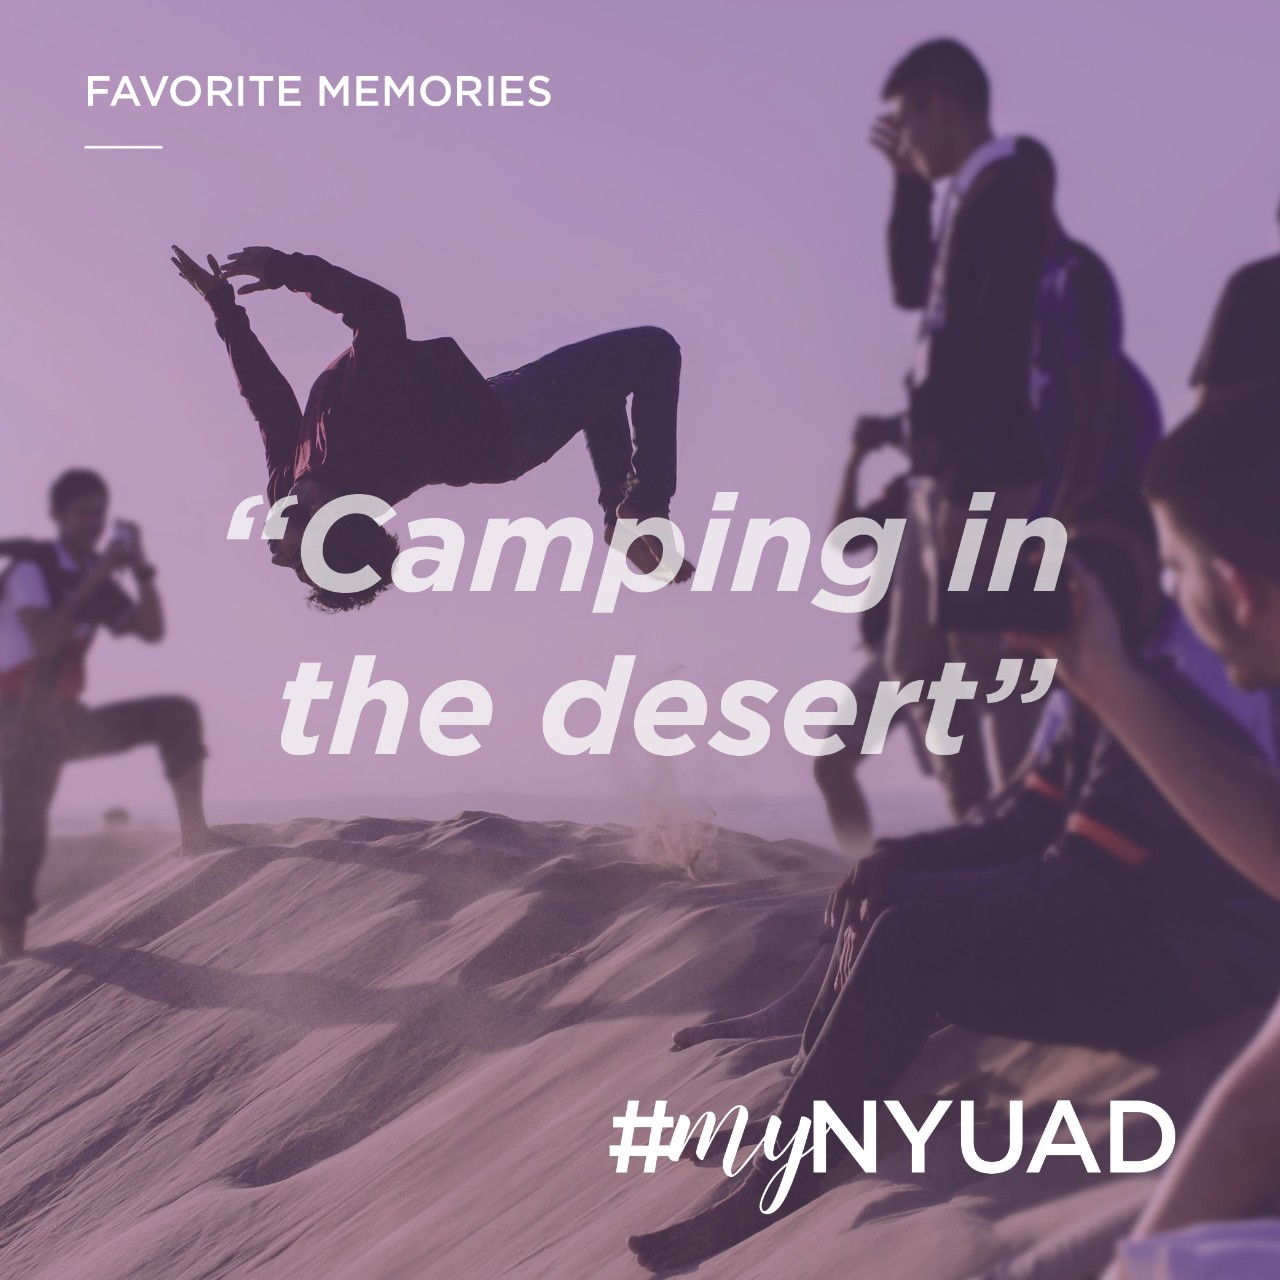 Quote: Camping in the desert. #myNYUAD